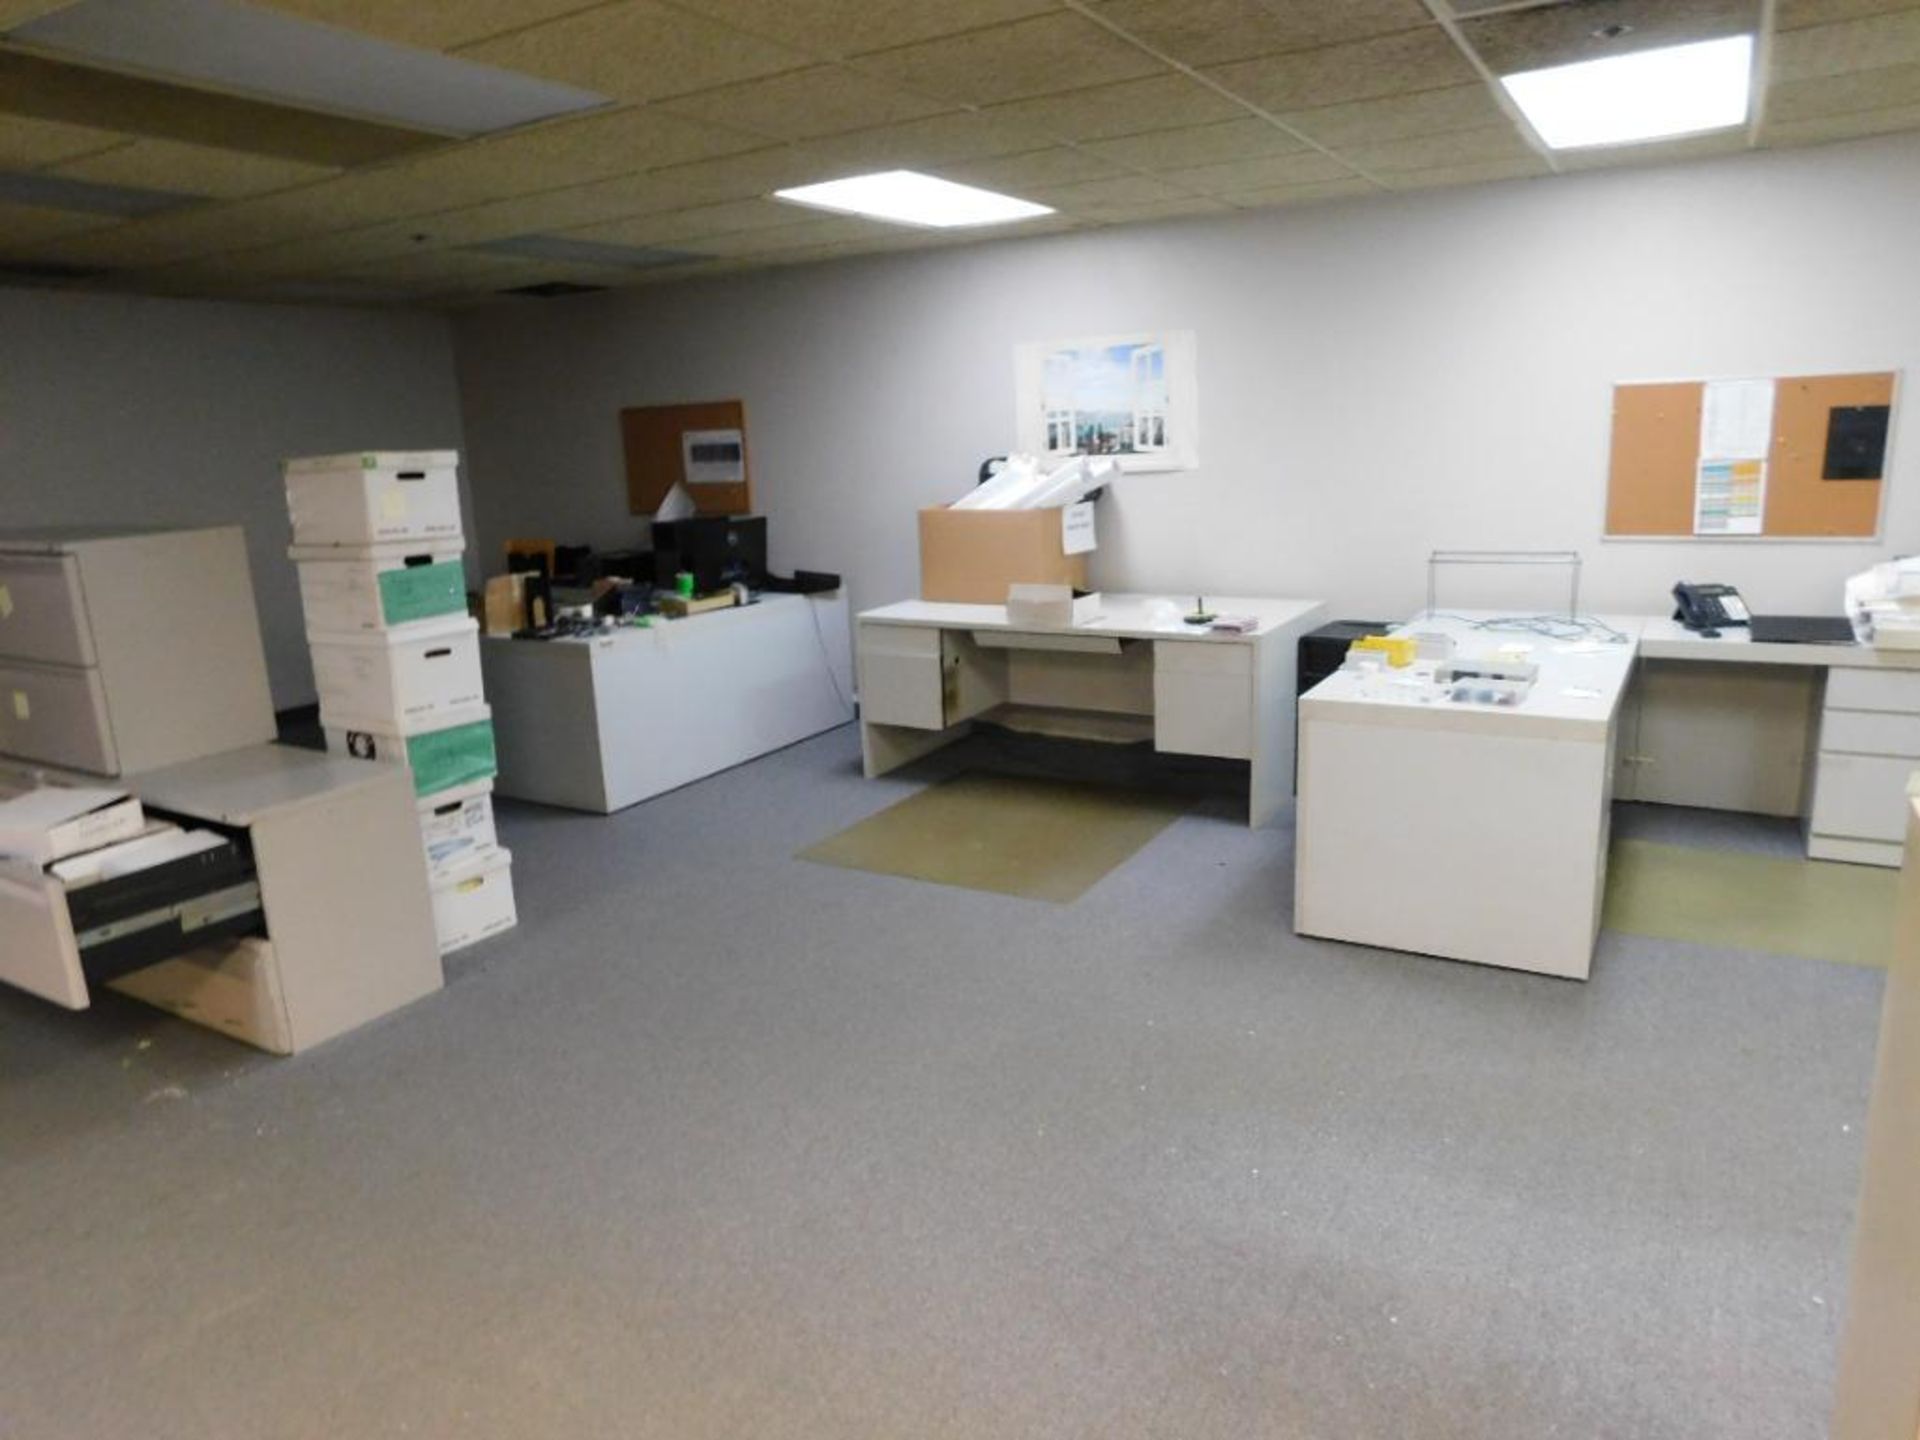 LOT: Contents of 2nd Floor Offices (NO ELEVATOR): Desks, File Cabinets, Book Cases, Chairs, Tables, - Image 6 of 9